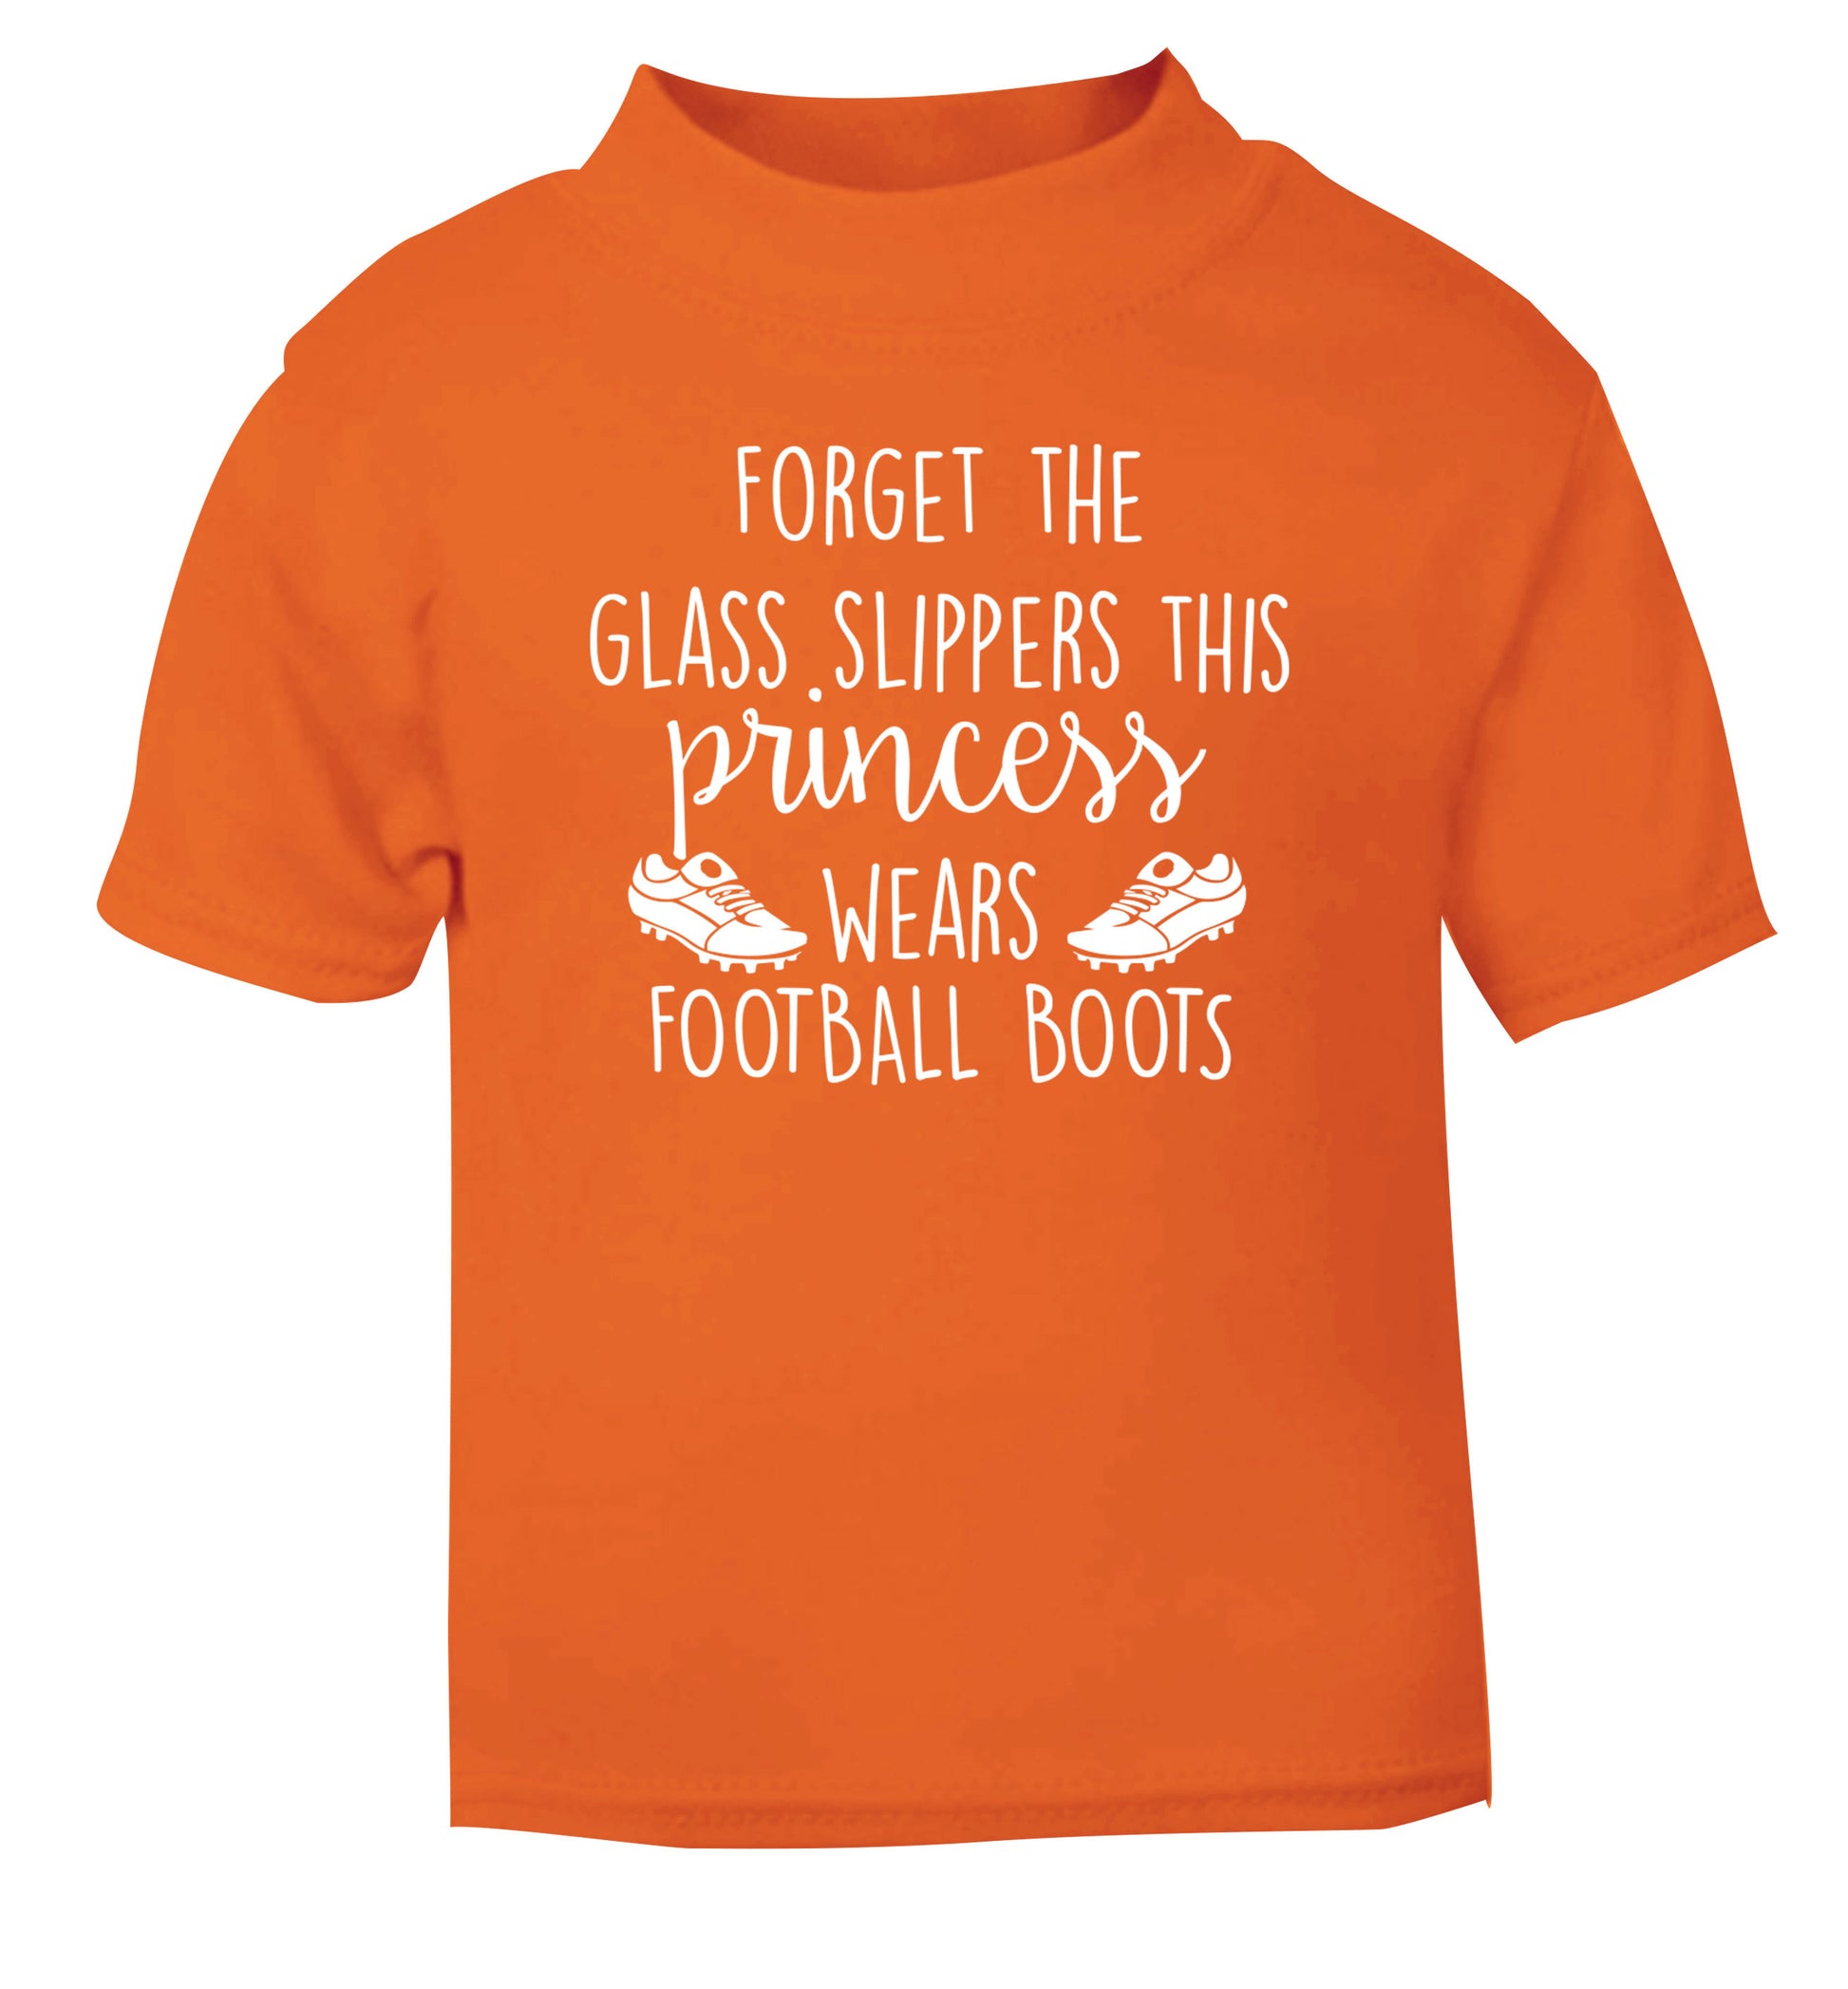 Forget the glass slippers this princess wears football boots orange Baby Toddler Tshirt 2 Years